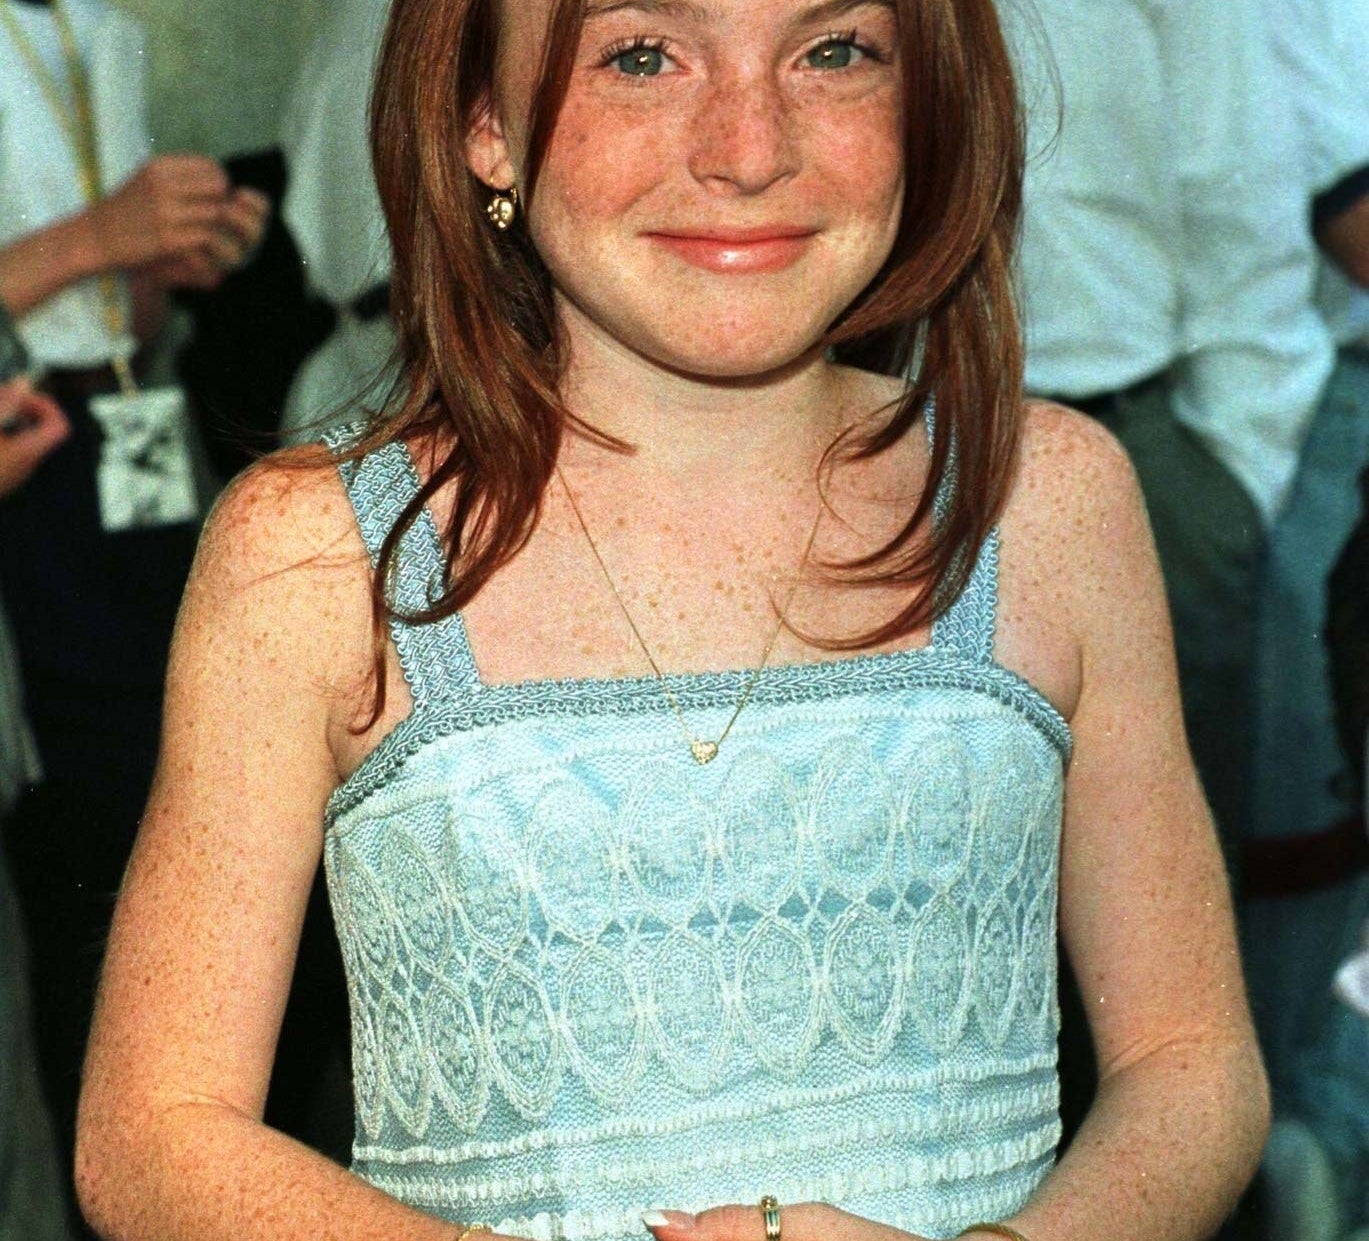 A young Lindsay attends the premiere of The Parent Trap